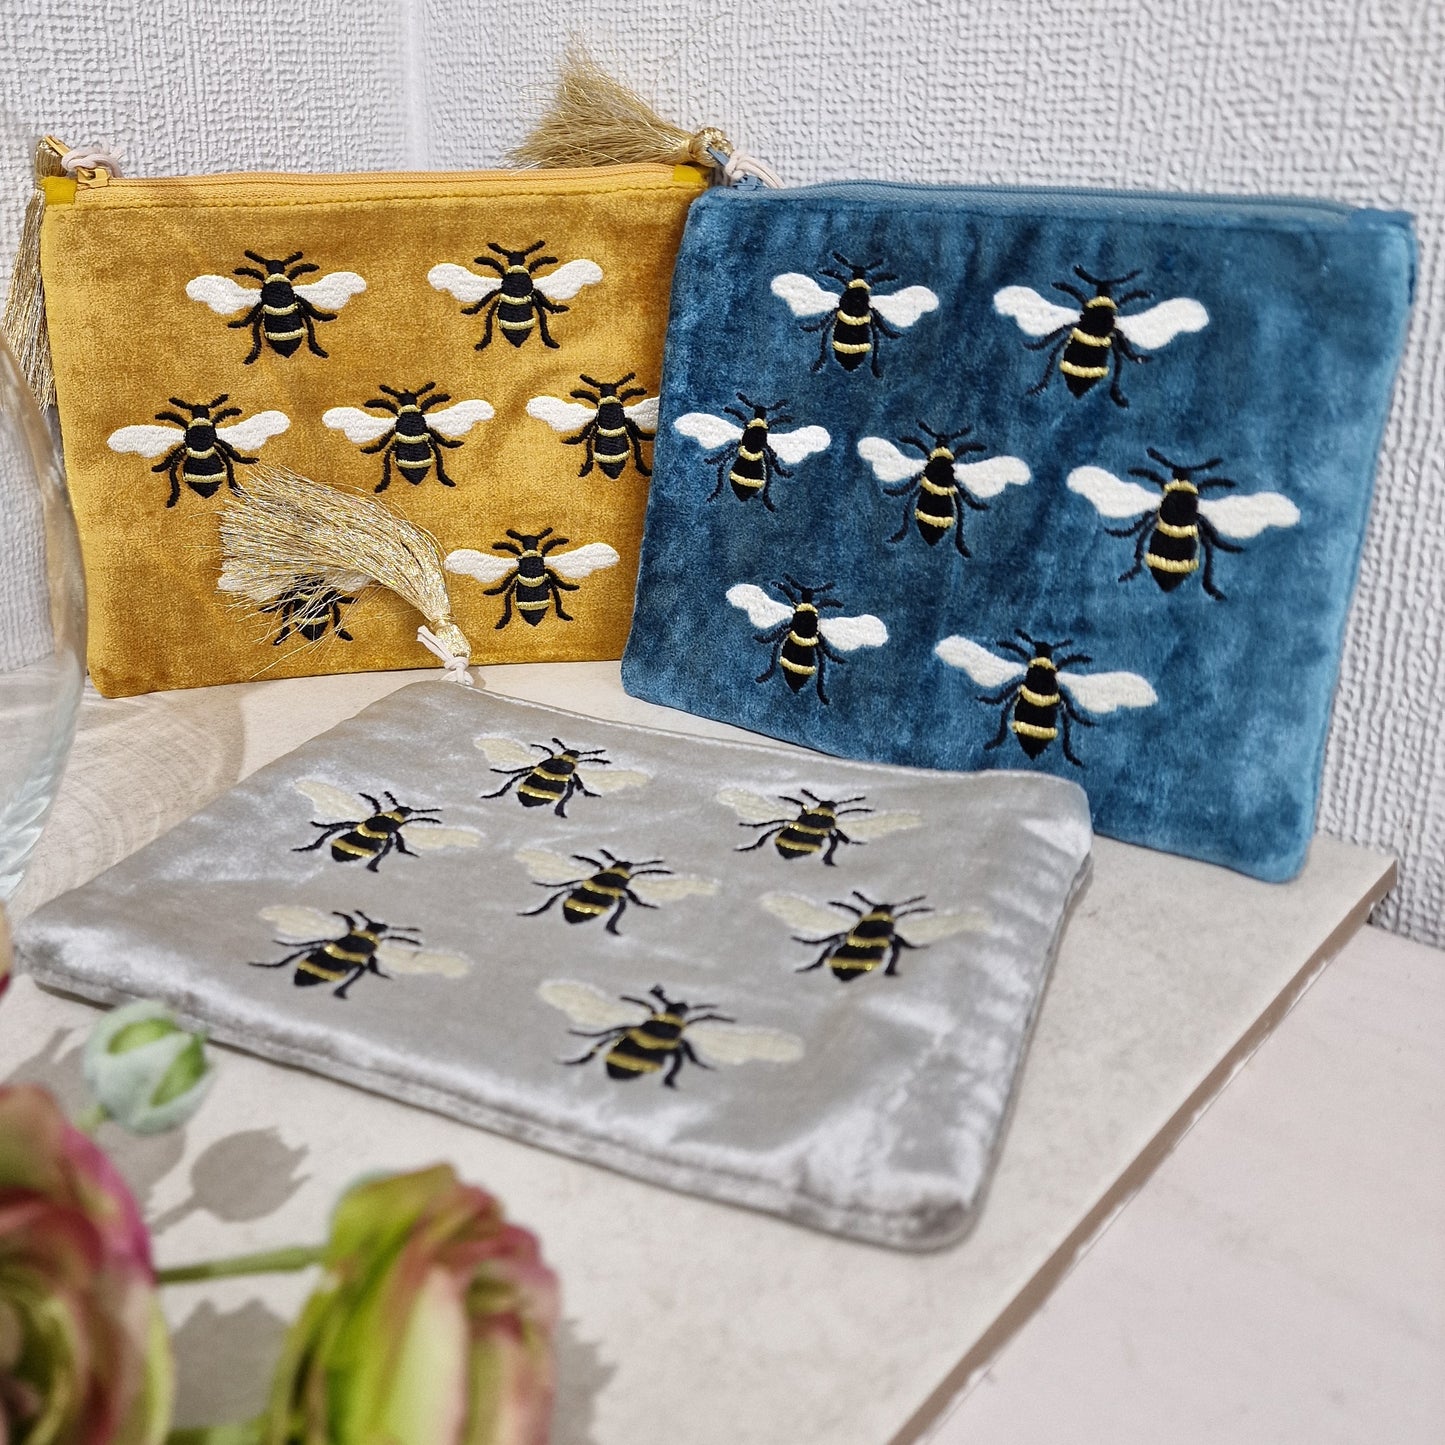 Bumble Bee Velvet Dove Grey Pouch Make Up Bag by POM